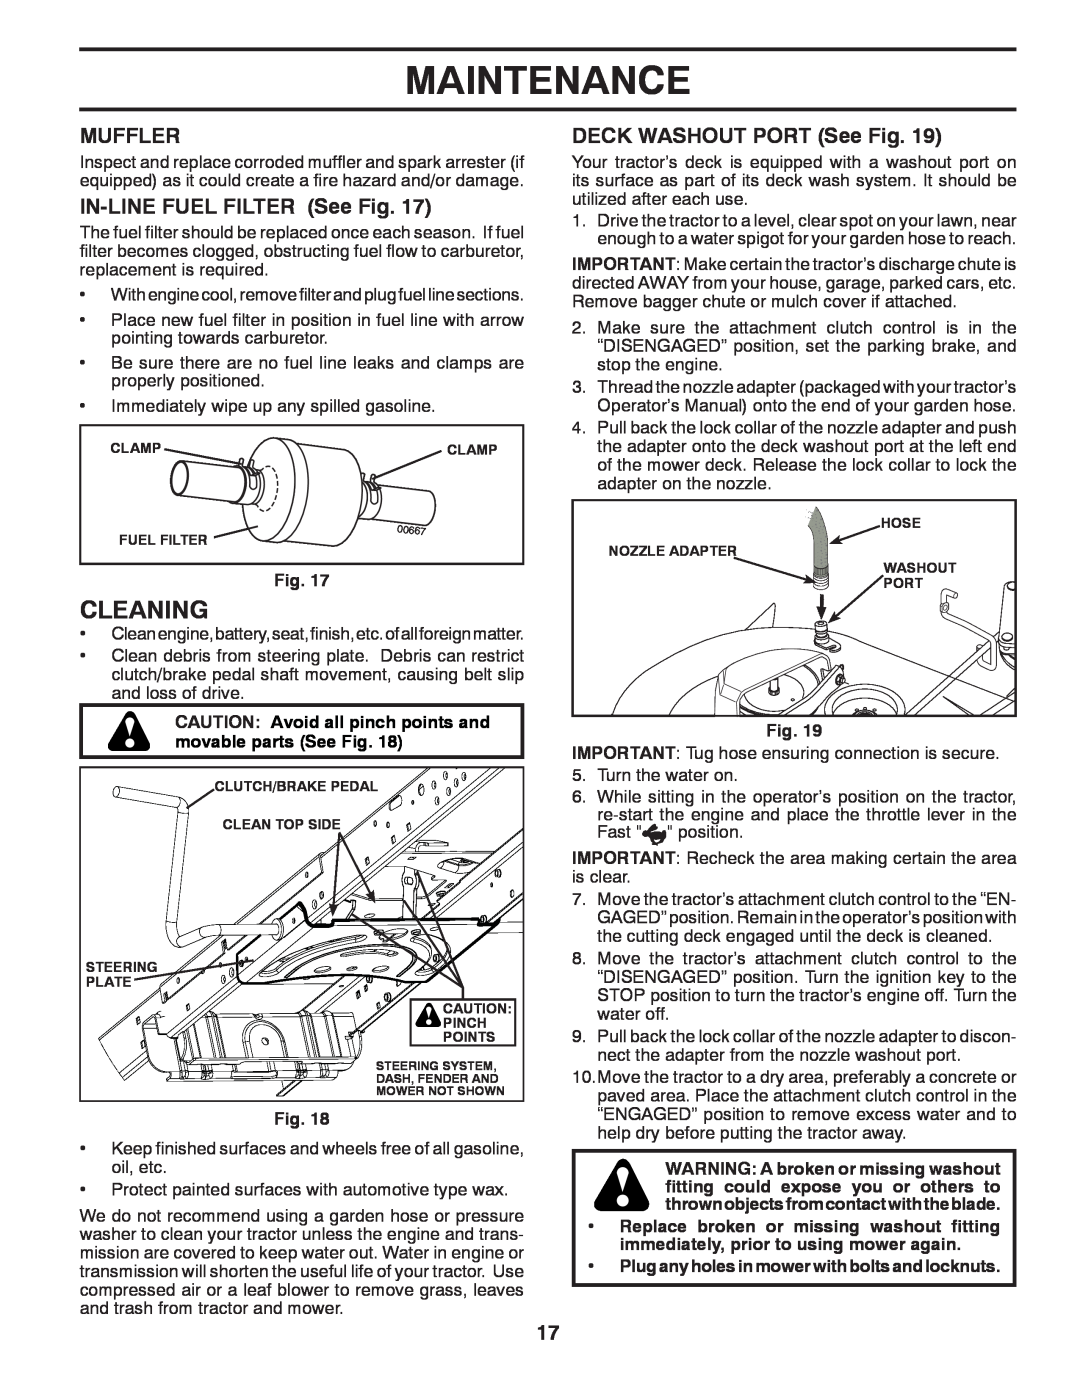 Poulan 433413, 96042010900 manual Cleaning, Muffler, IN-LINE FUEL FILTER See Fig, DECK WASHOUT PORT See Fig, Maintenance 